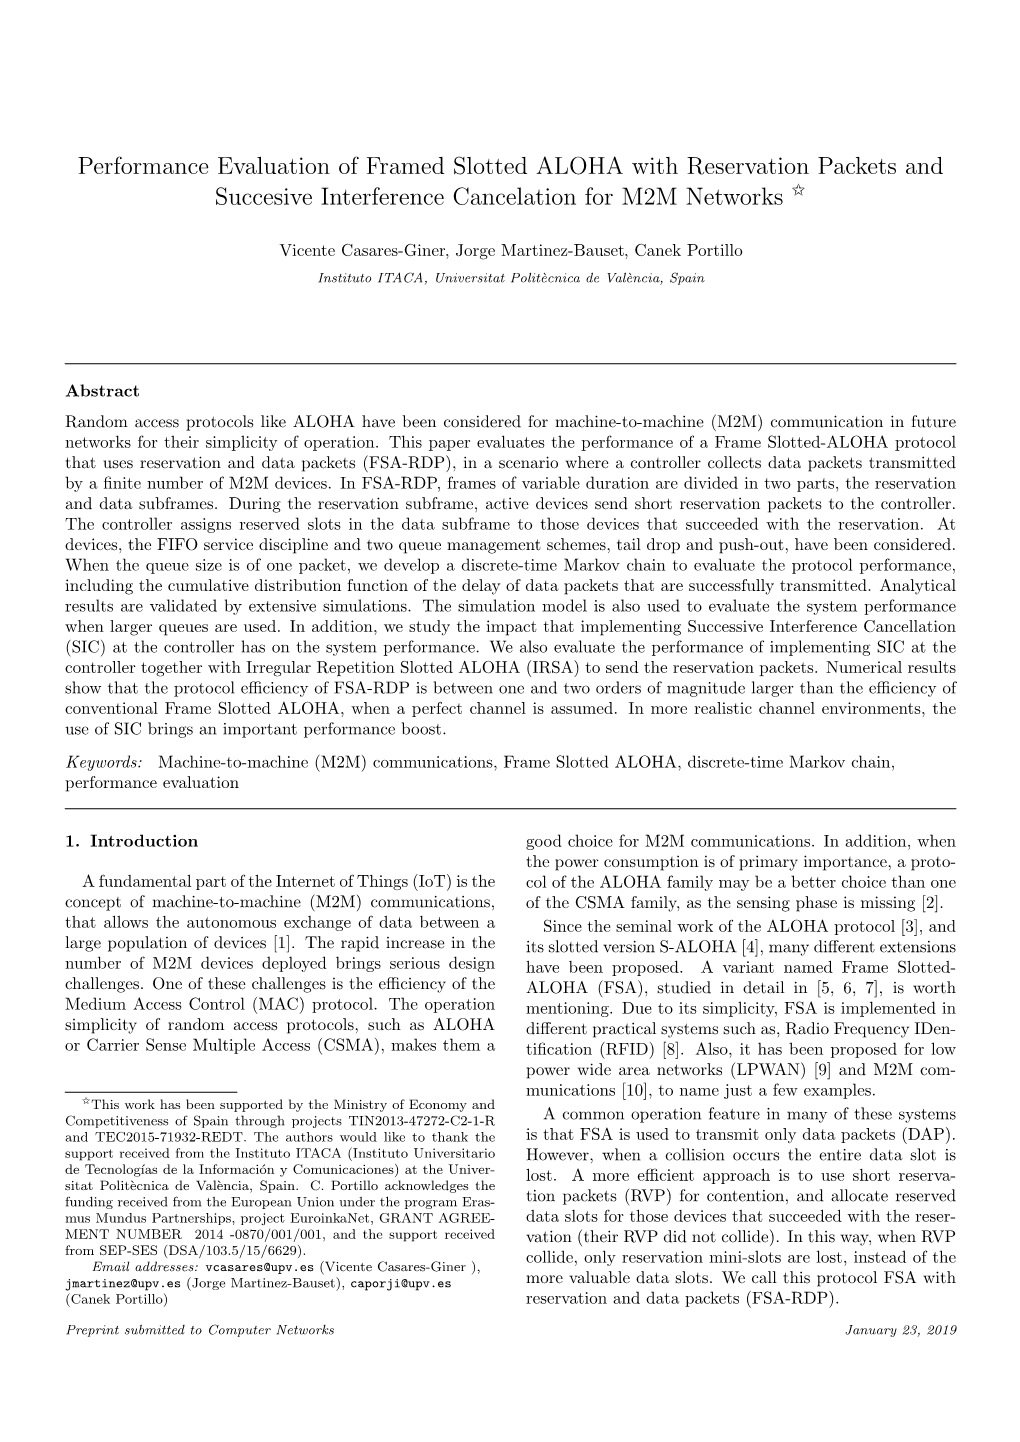 Performance Evaluation of Framed Slotted ALOHA with Reservation Packets and Succesive Interference Cancelation for M2M Networks $